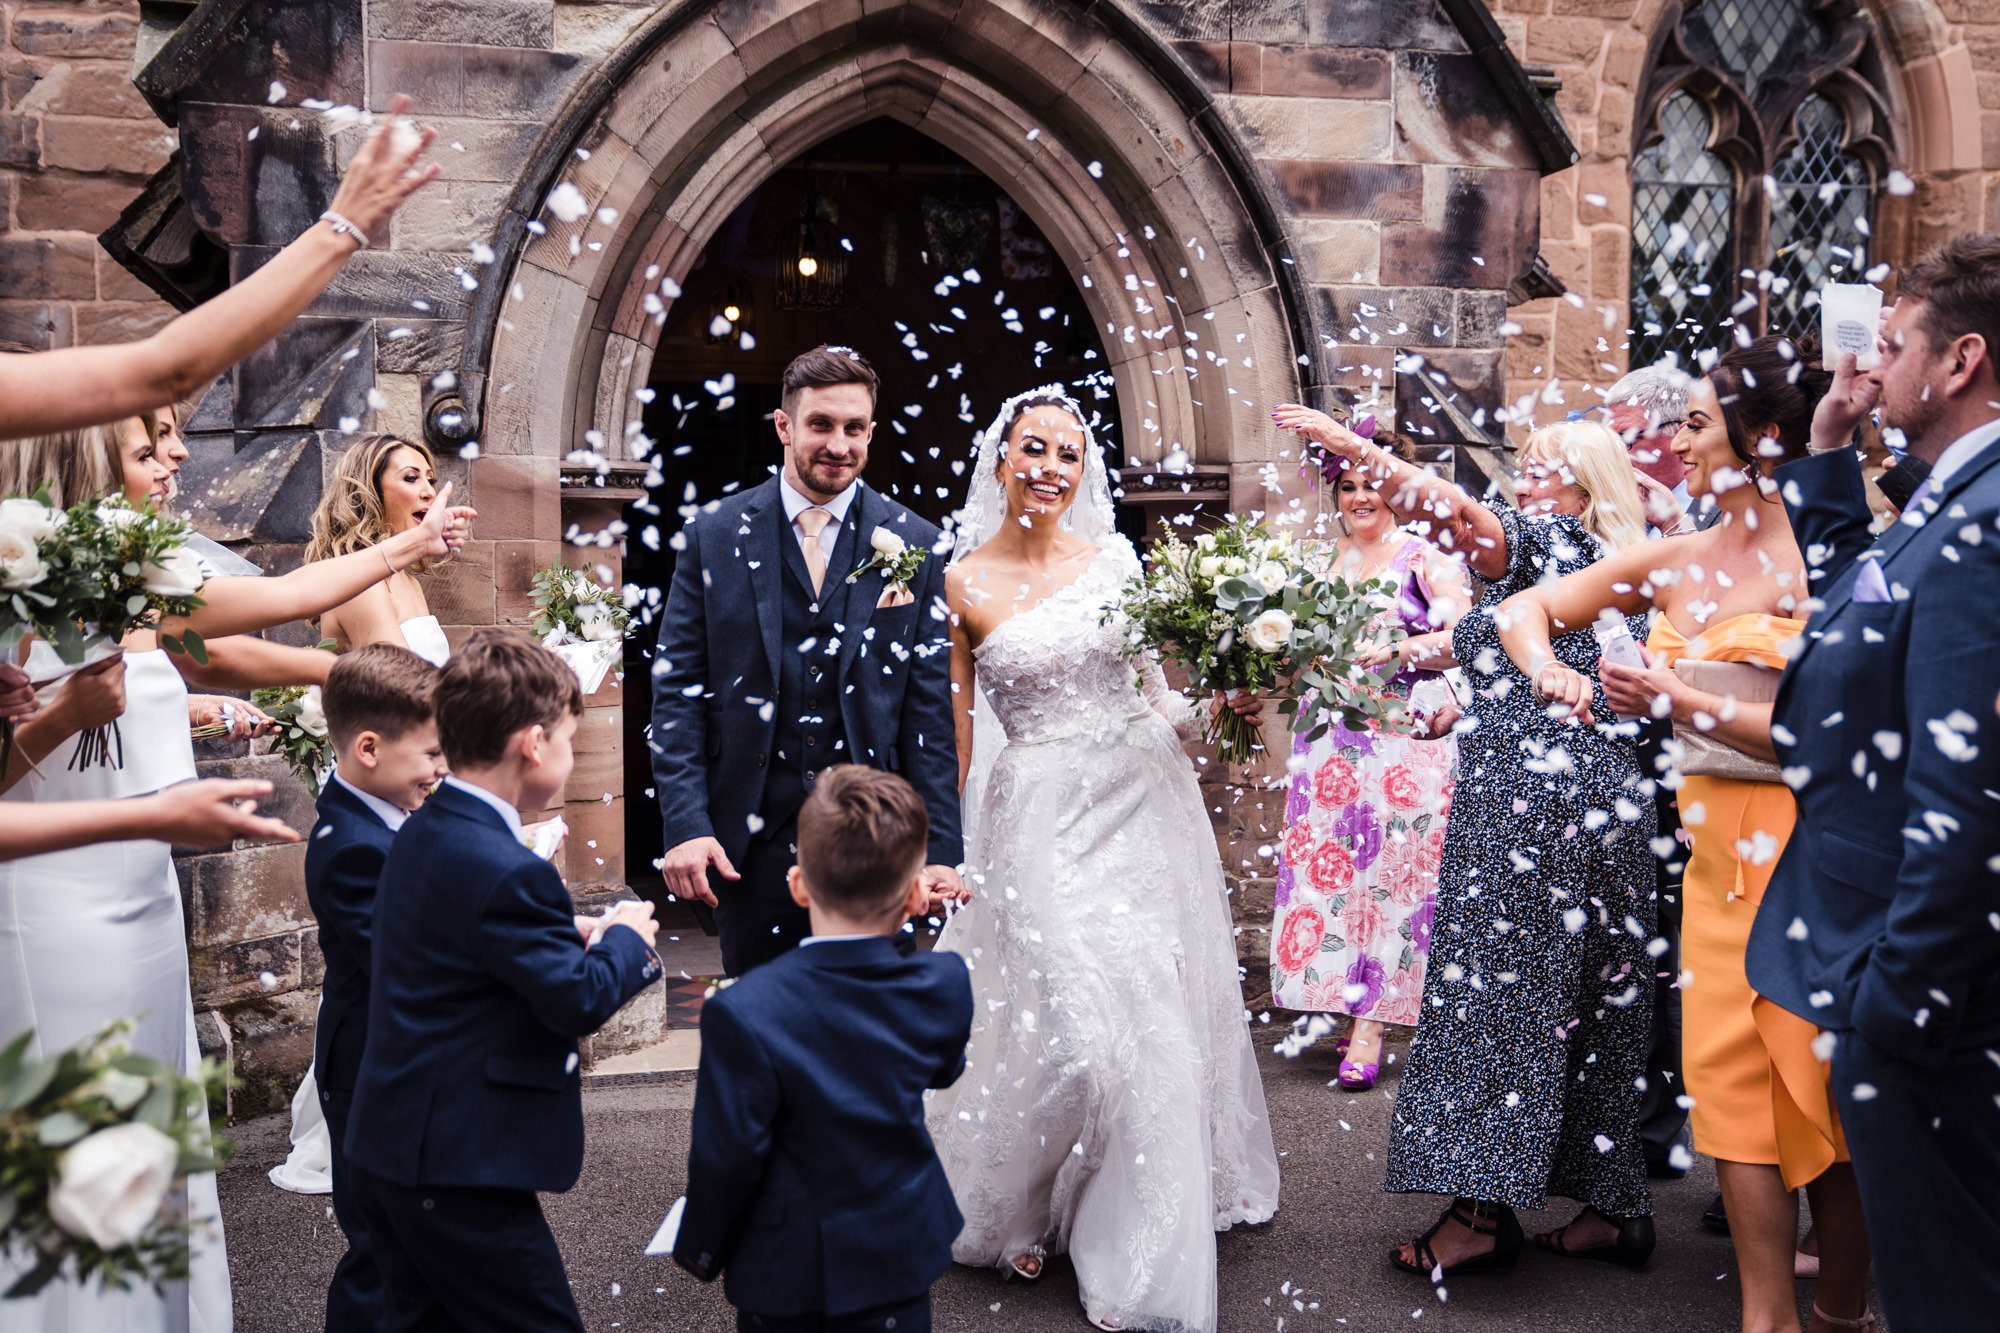 bride and groom looking happy as they walk through confetti outside a church